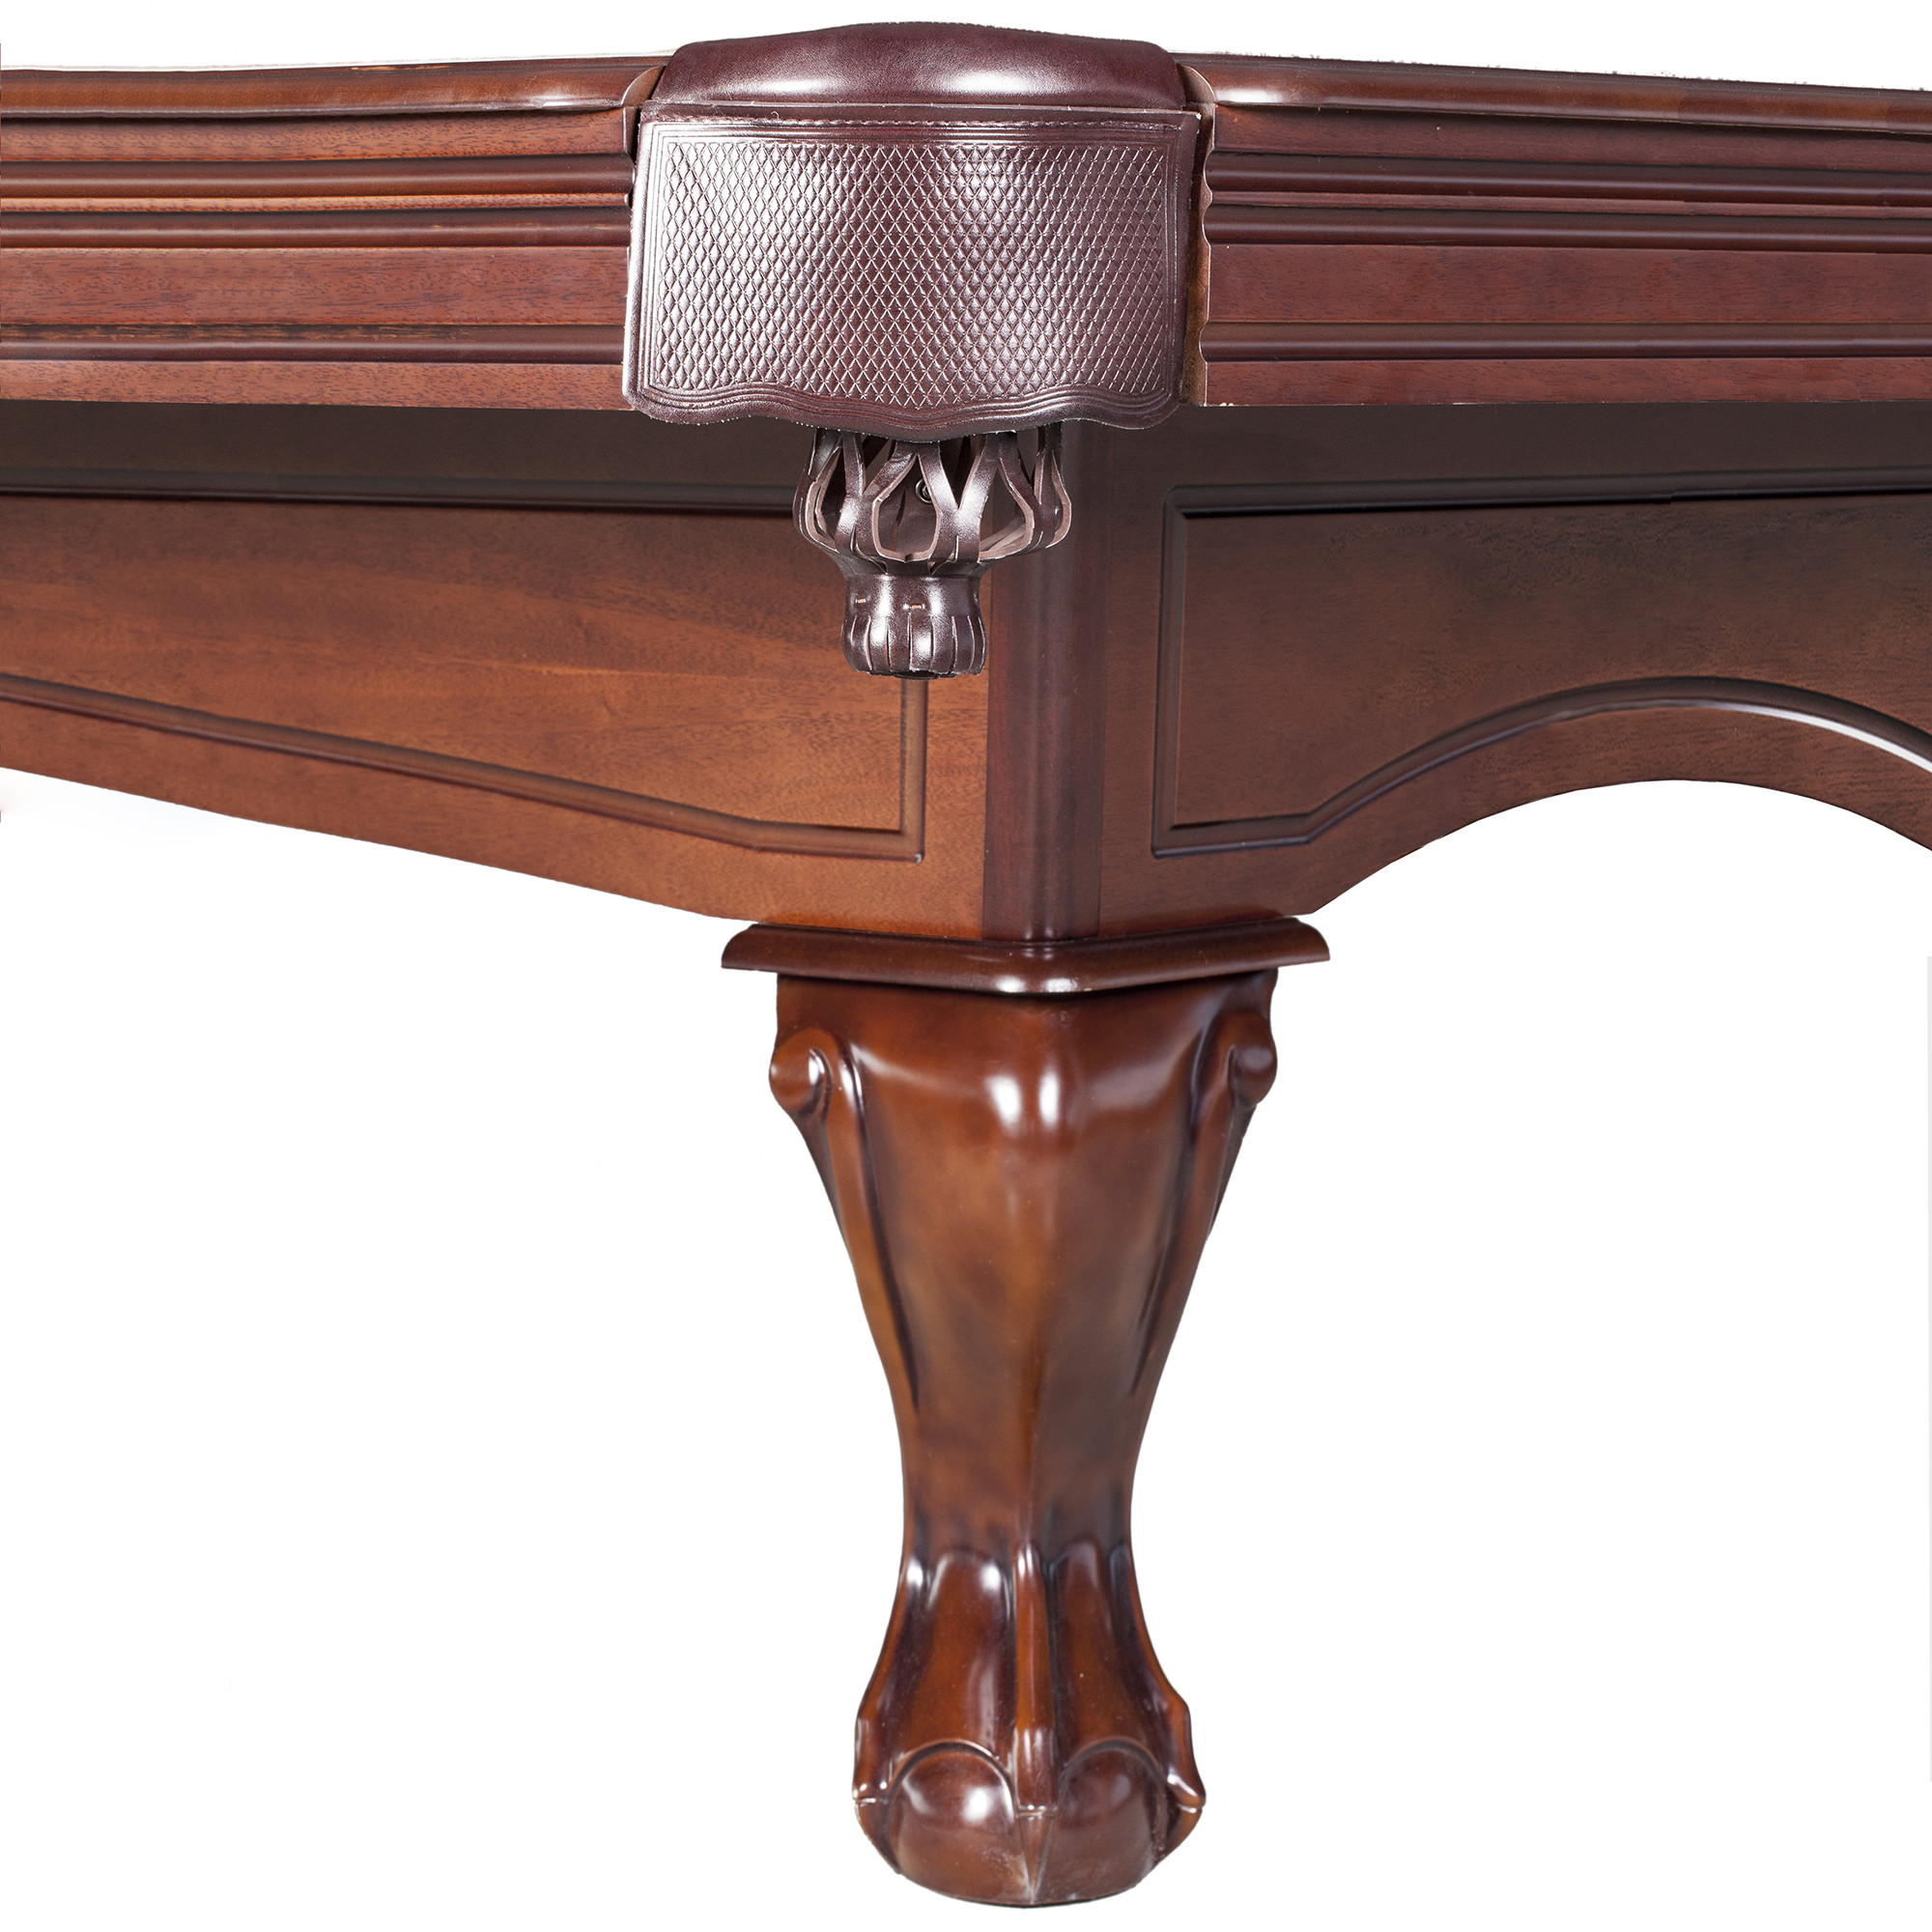 Hathaway Augusta 8 ft. Non-Slate Pool Table - Walnut Finish, 100.5-in l x 55-in w, Camel Felt - image 4 of 14